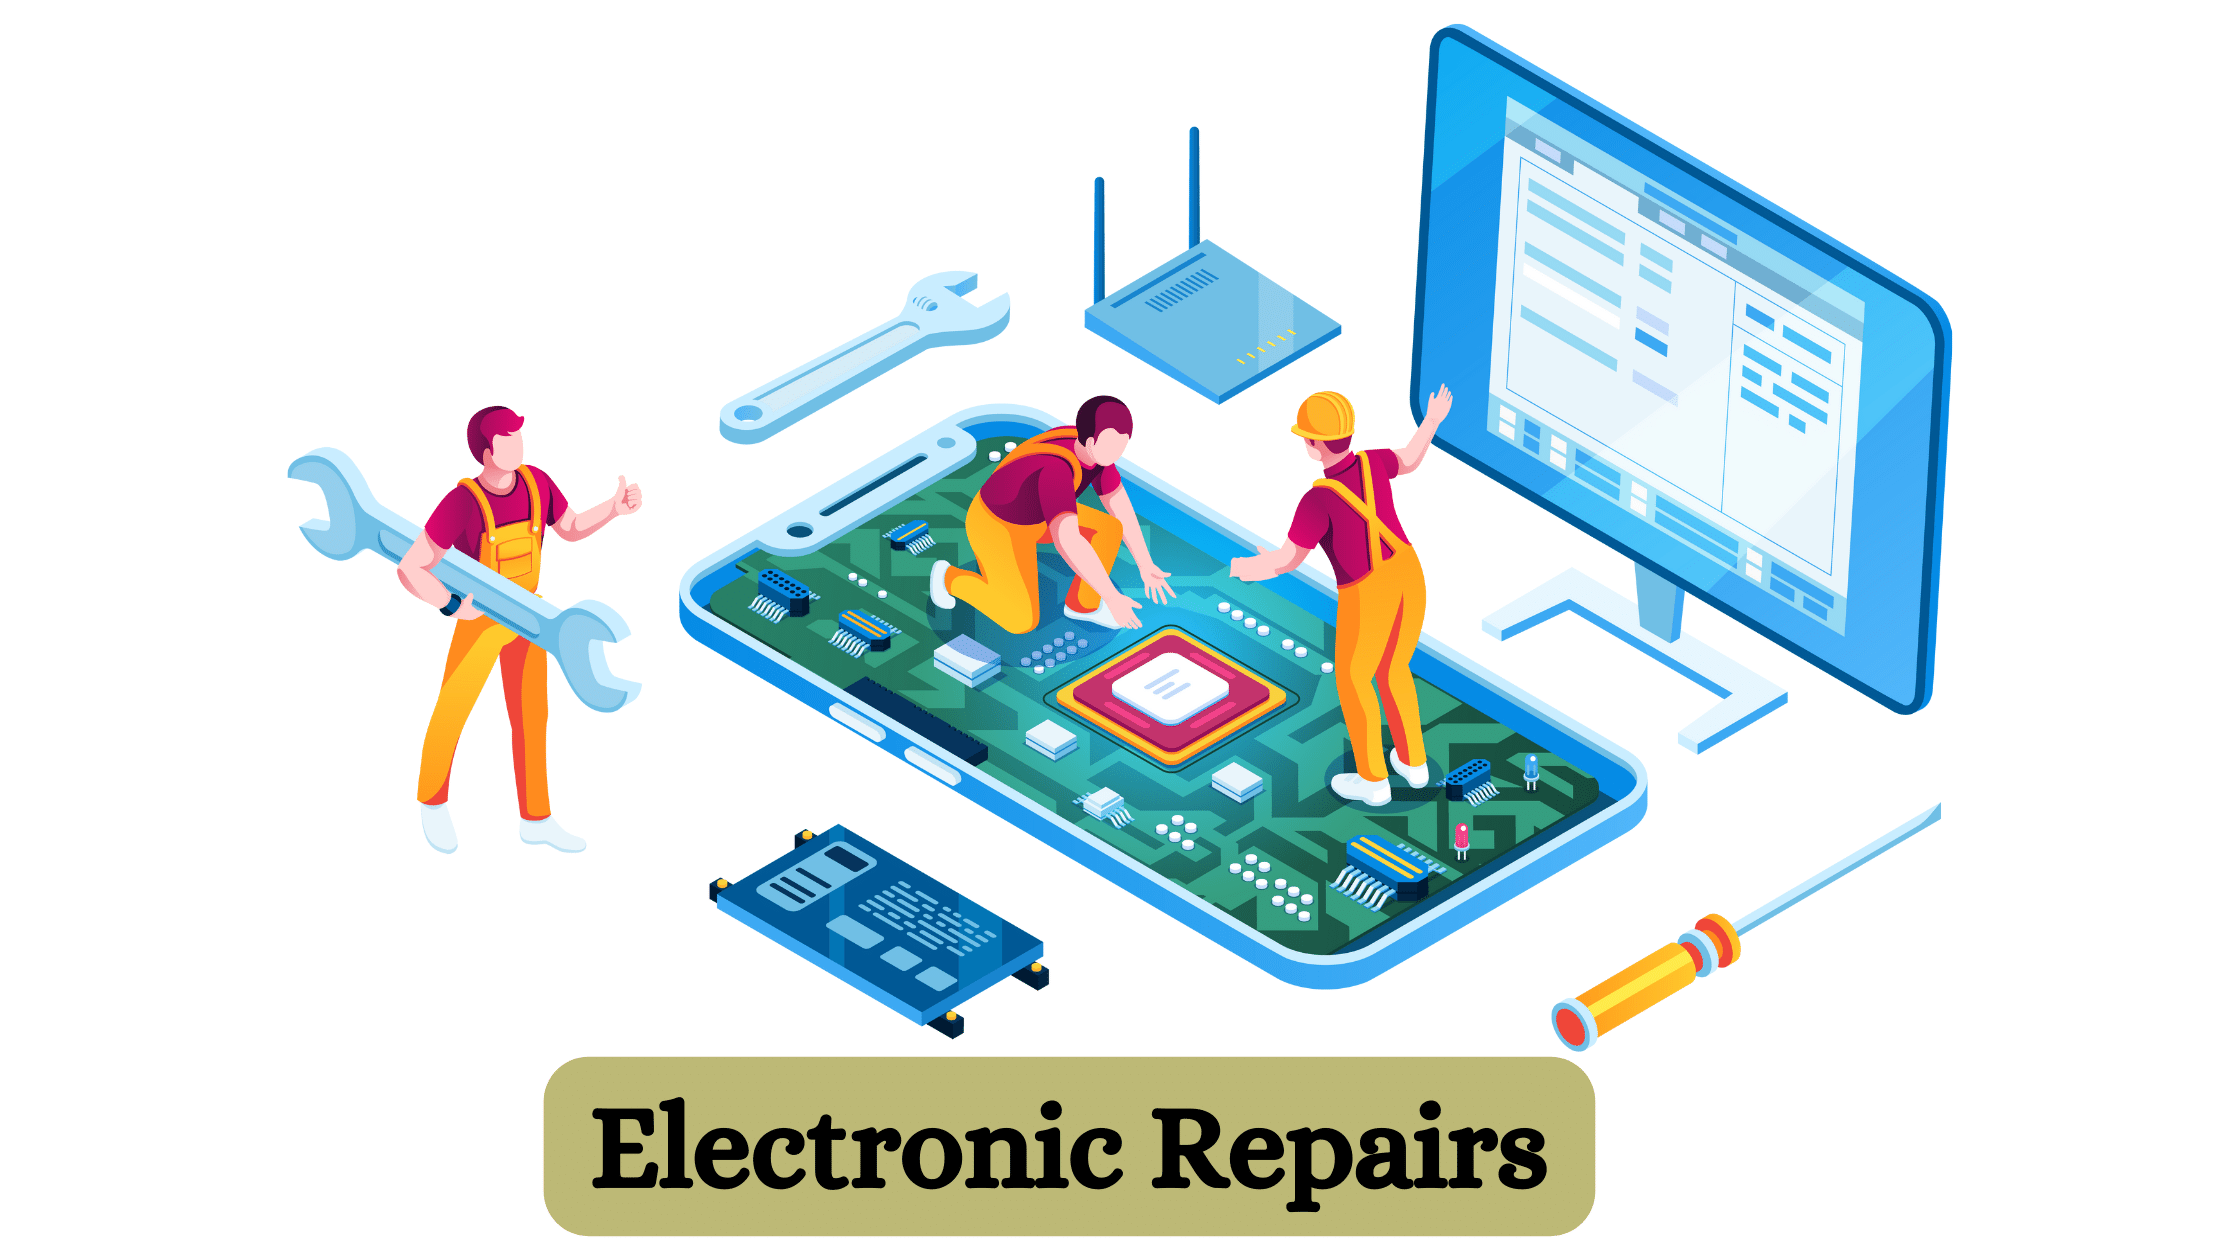 Successful Industrial Electronic Repairs